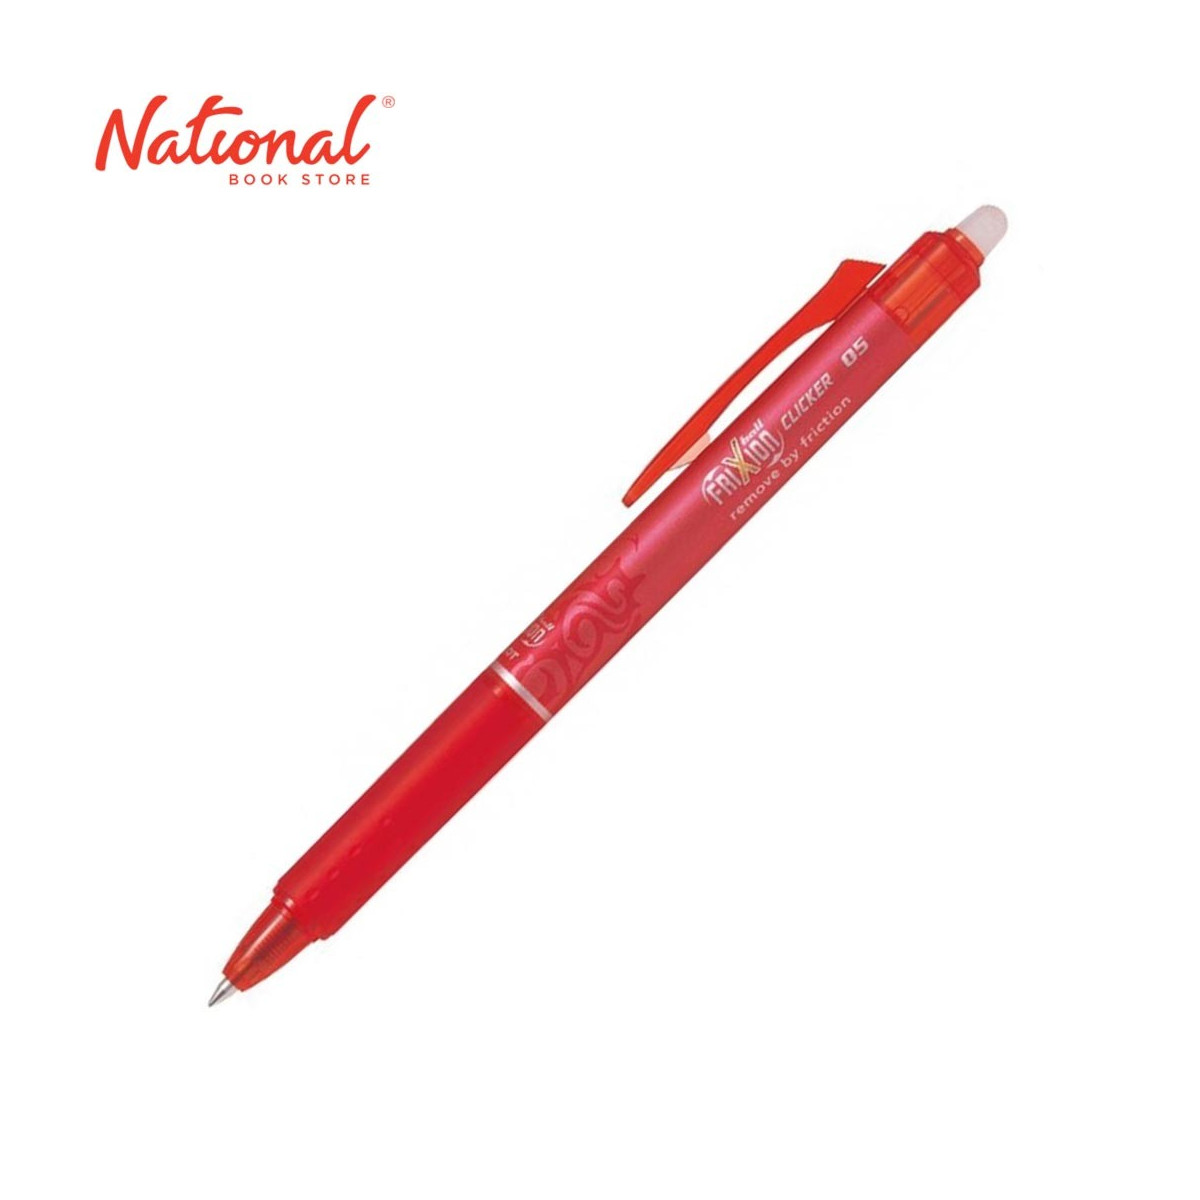 PILOT FRIXION RETRACTABLE ROLLERBALL PEN BLRTFR5 RED